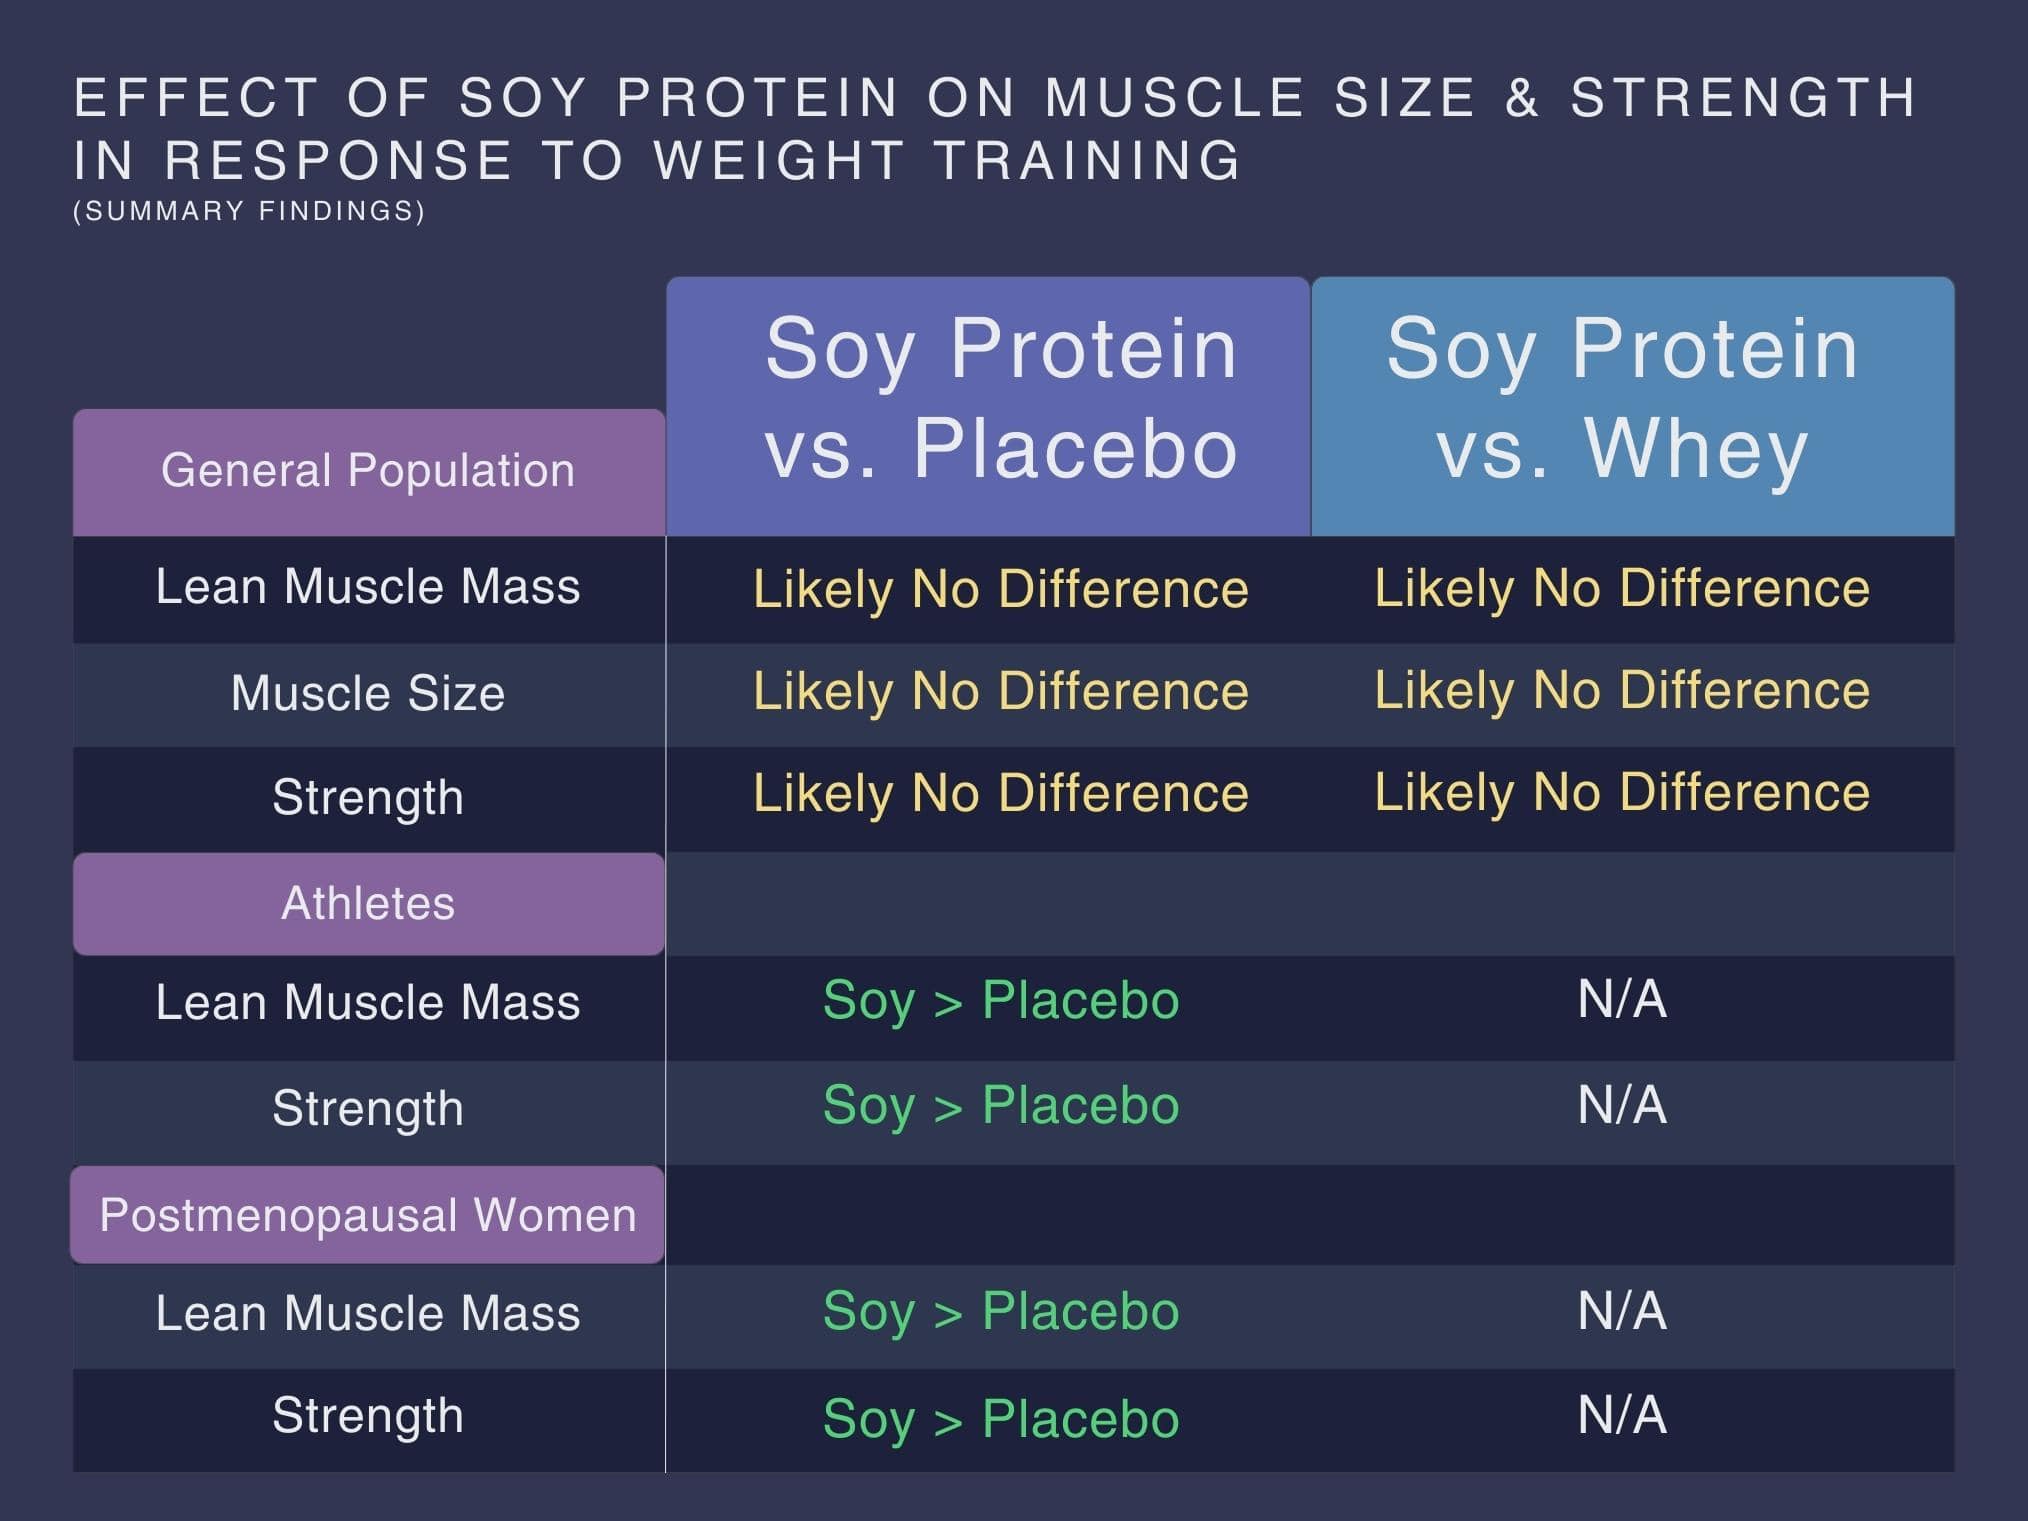 This image contains a table that compares soy protein vs. placebo and soy protein vs. whey. It shows that for the general population, soy protein powder is unlikely to increase lean muscle mass, muscle size, or strength better than placebo. It also shows that whey protein powder isn’t more effective than soy protein at building muscle mass, enhancing growth in muscle size, or improving gains in muscle strength. The image also shows that soy protein may be more effective than placebo for increasing lean muscle mass and strength in athletes and postmenopausal women.